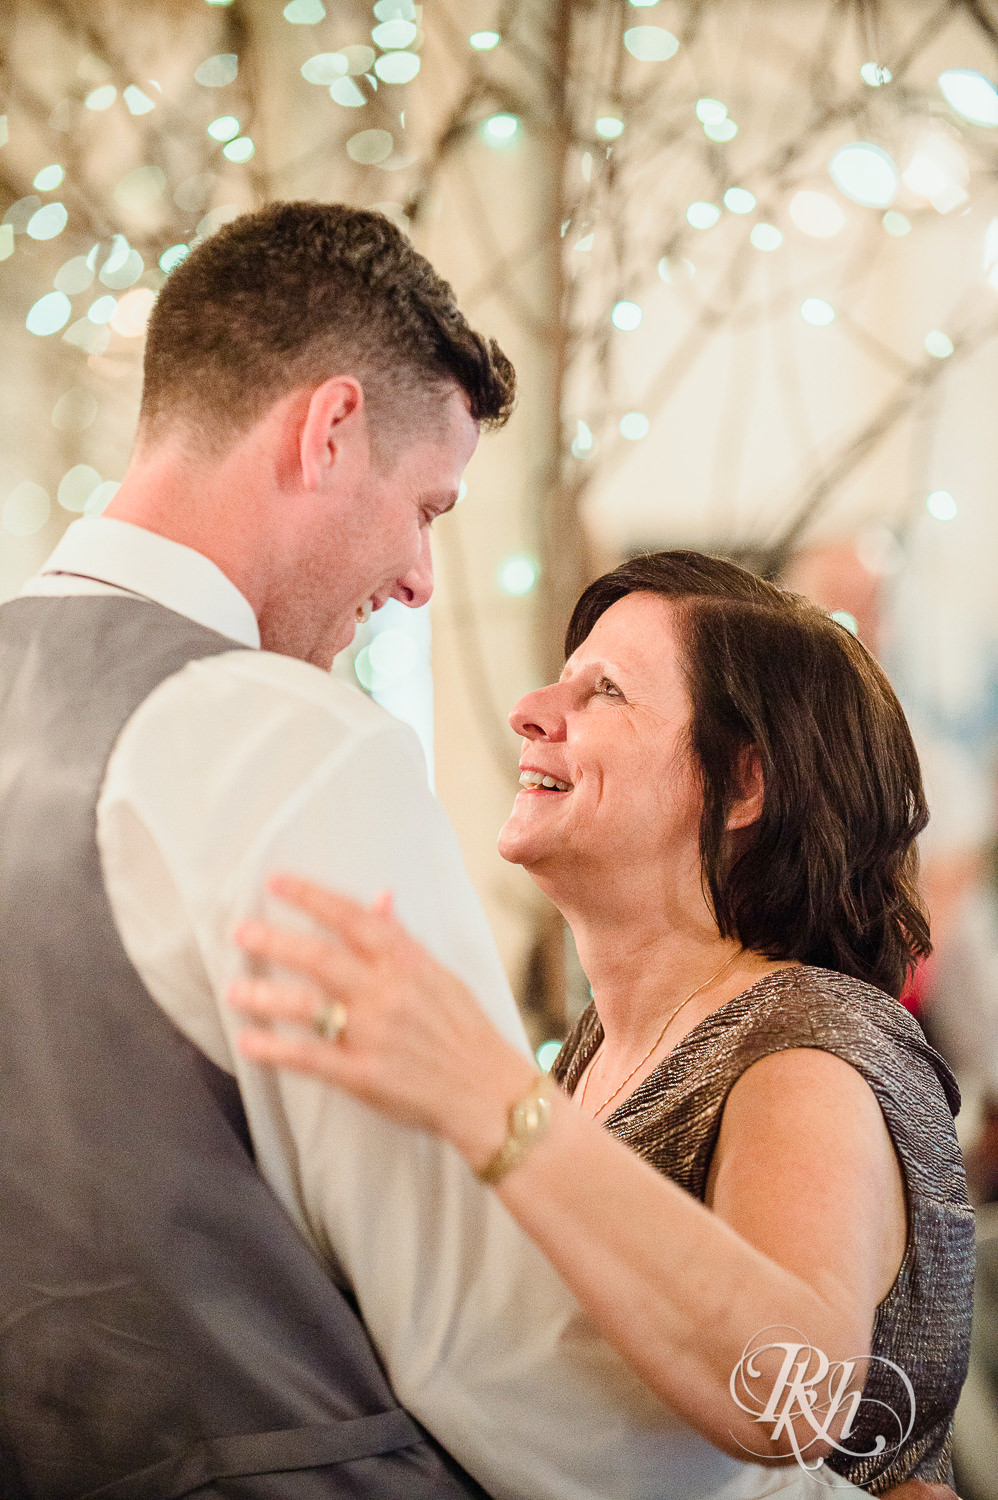 Groom and his mom dance during wedding reception at Camrose Hill Flower Farm in Stillwater, Minnesota.